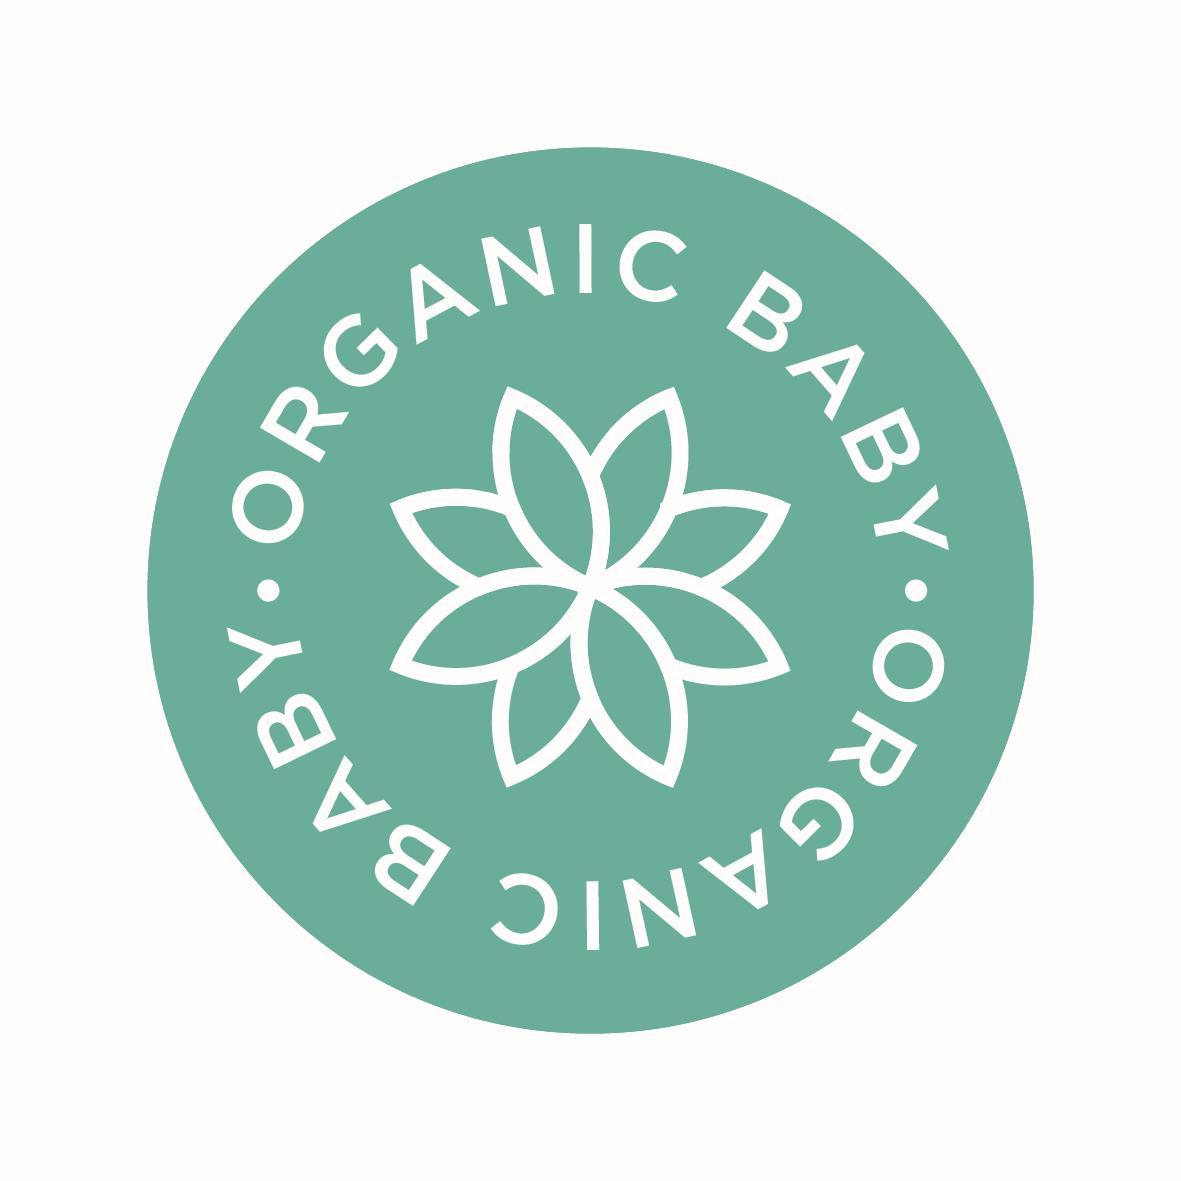 We are an online store selling natural and organic baby products.  An organic product means a healthier alternative.
facebook: @organicbabyonlineSA